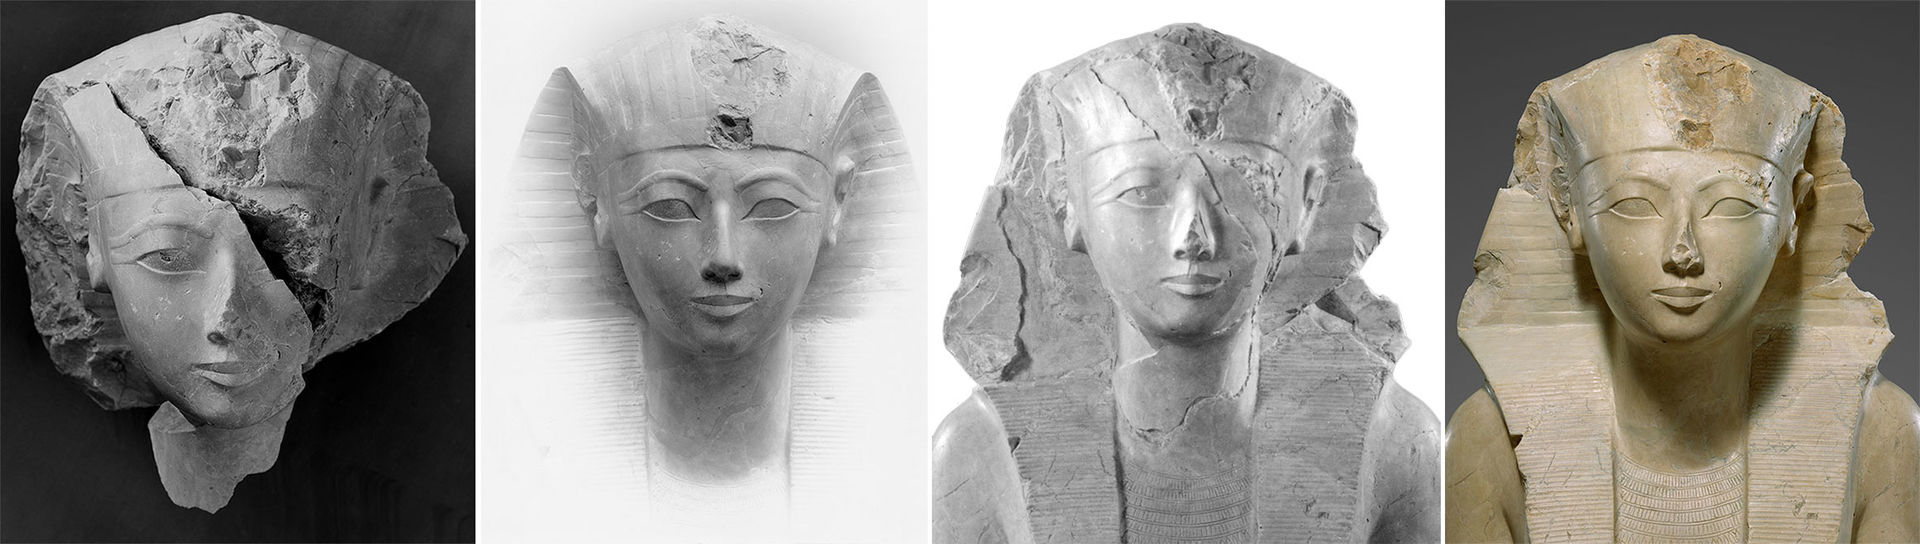 Head of Hatshepsut at four points in time